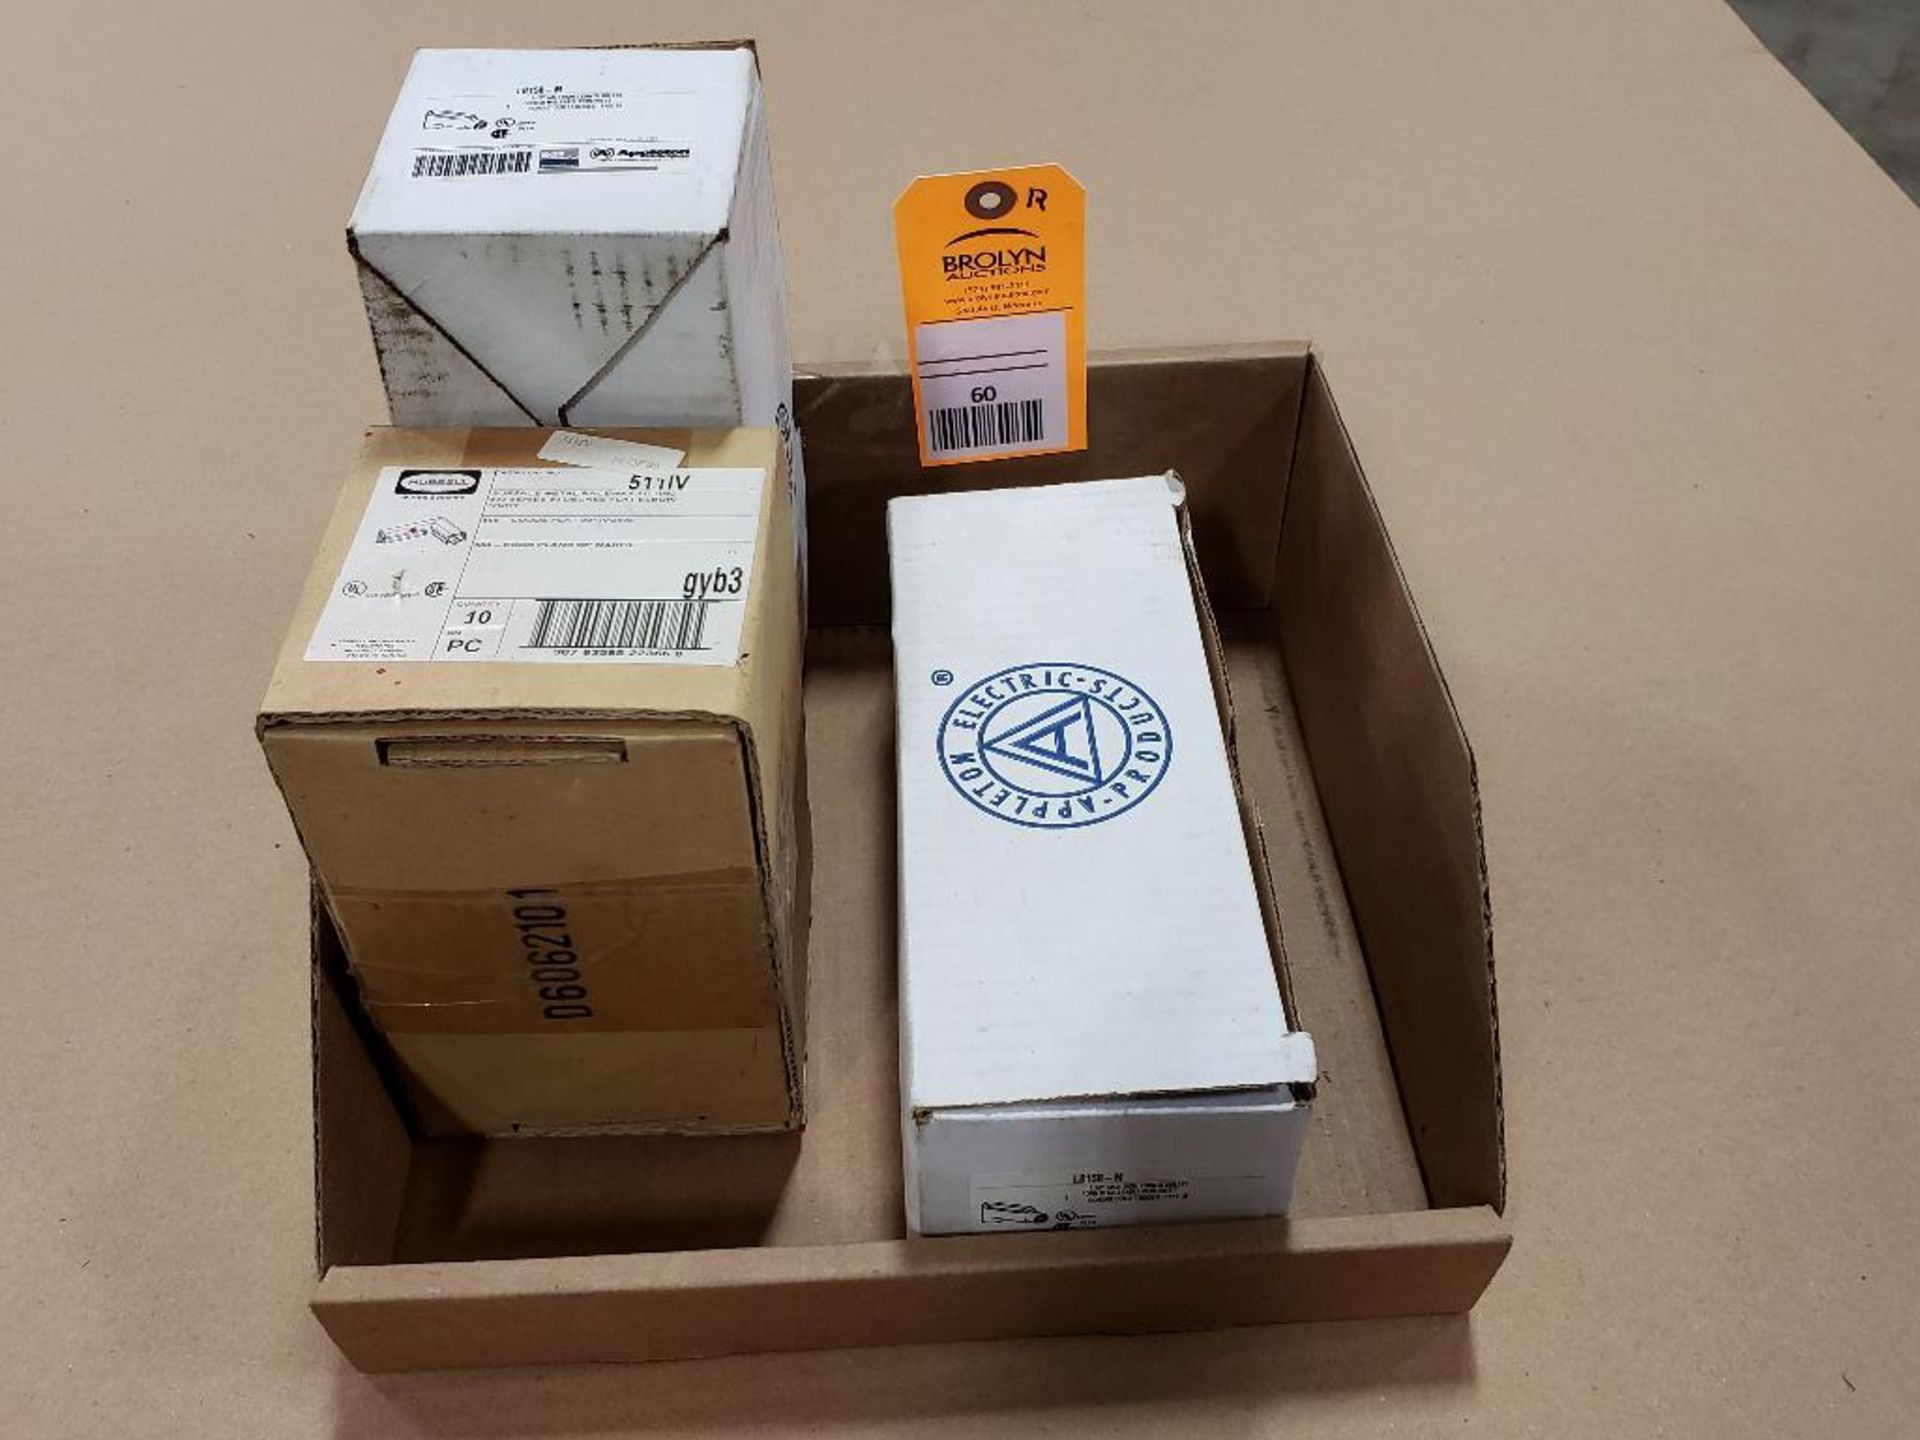 Qty 12 - Assorted Appleton parts in bulk boxes.